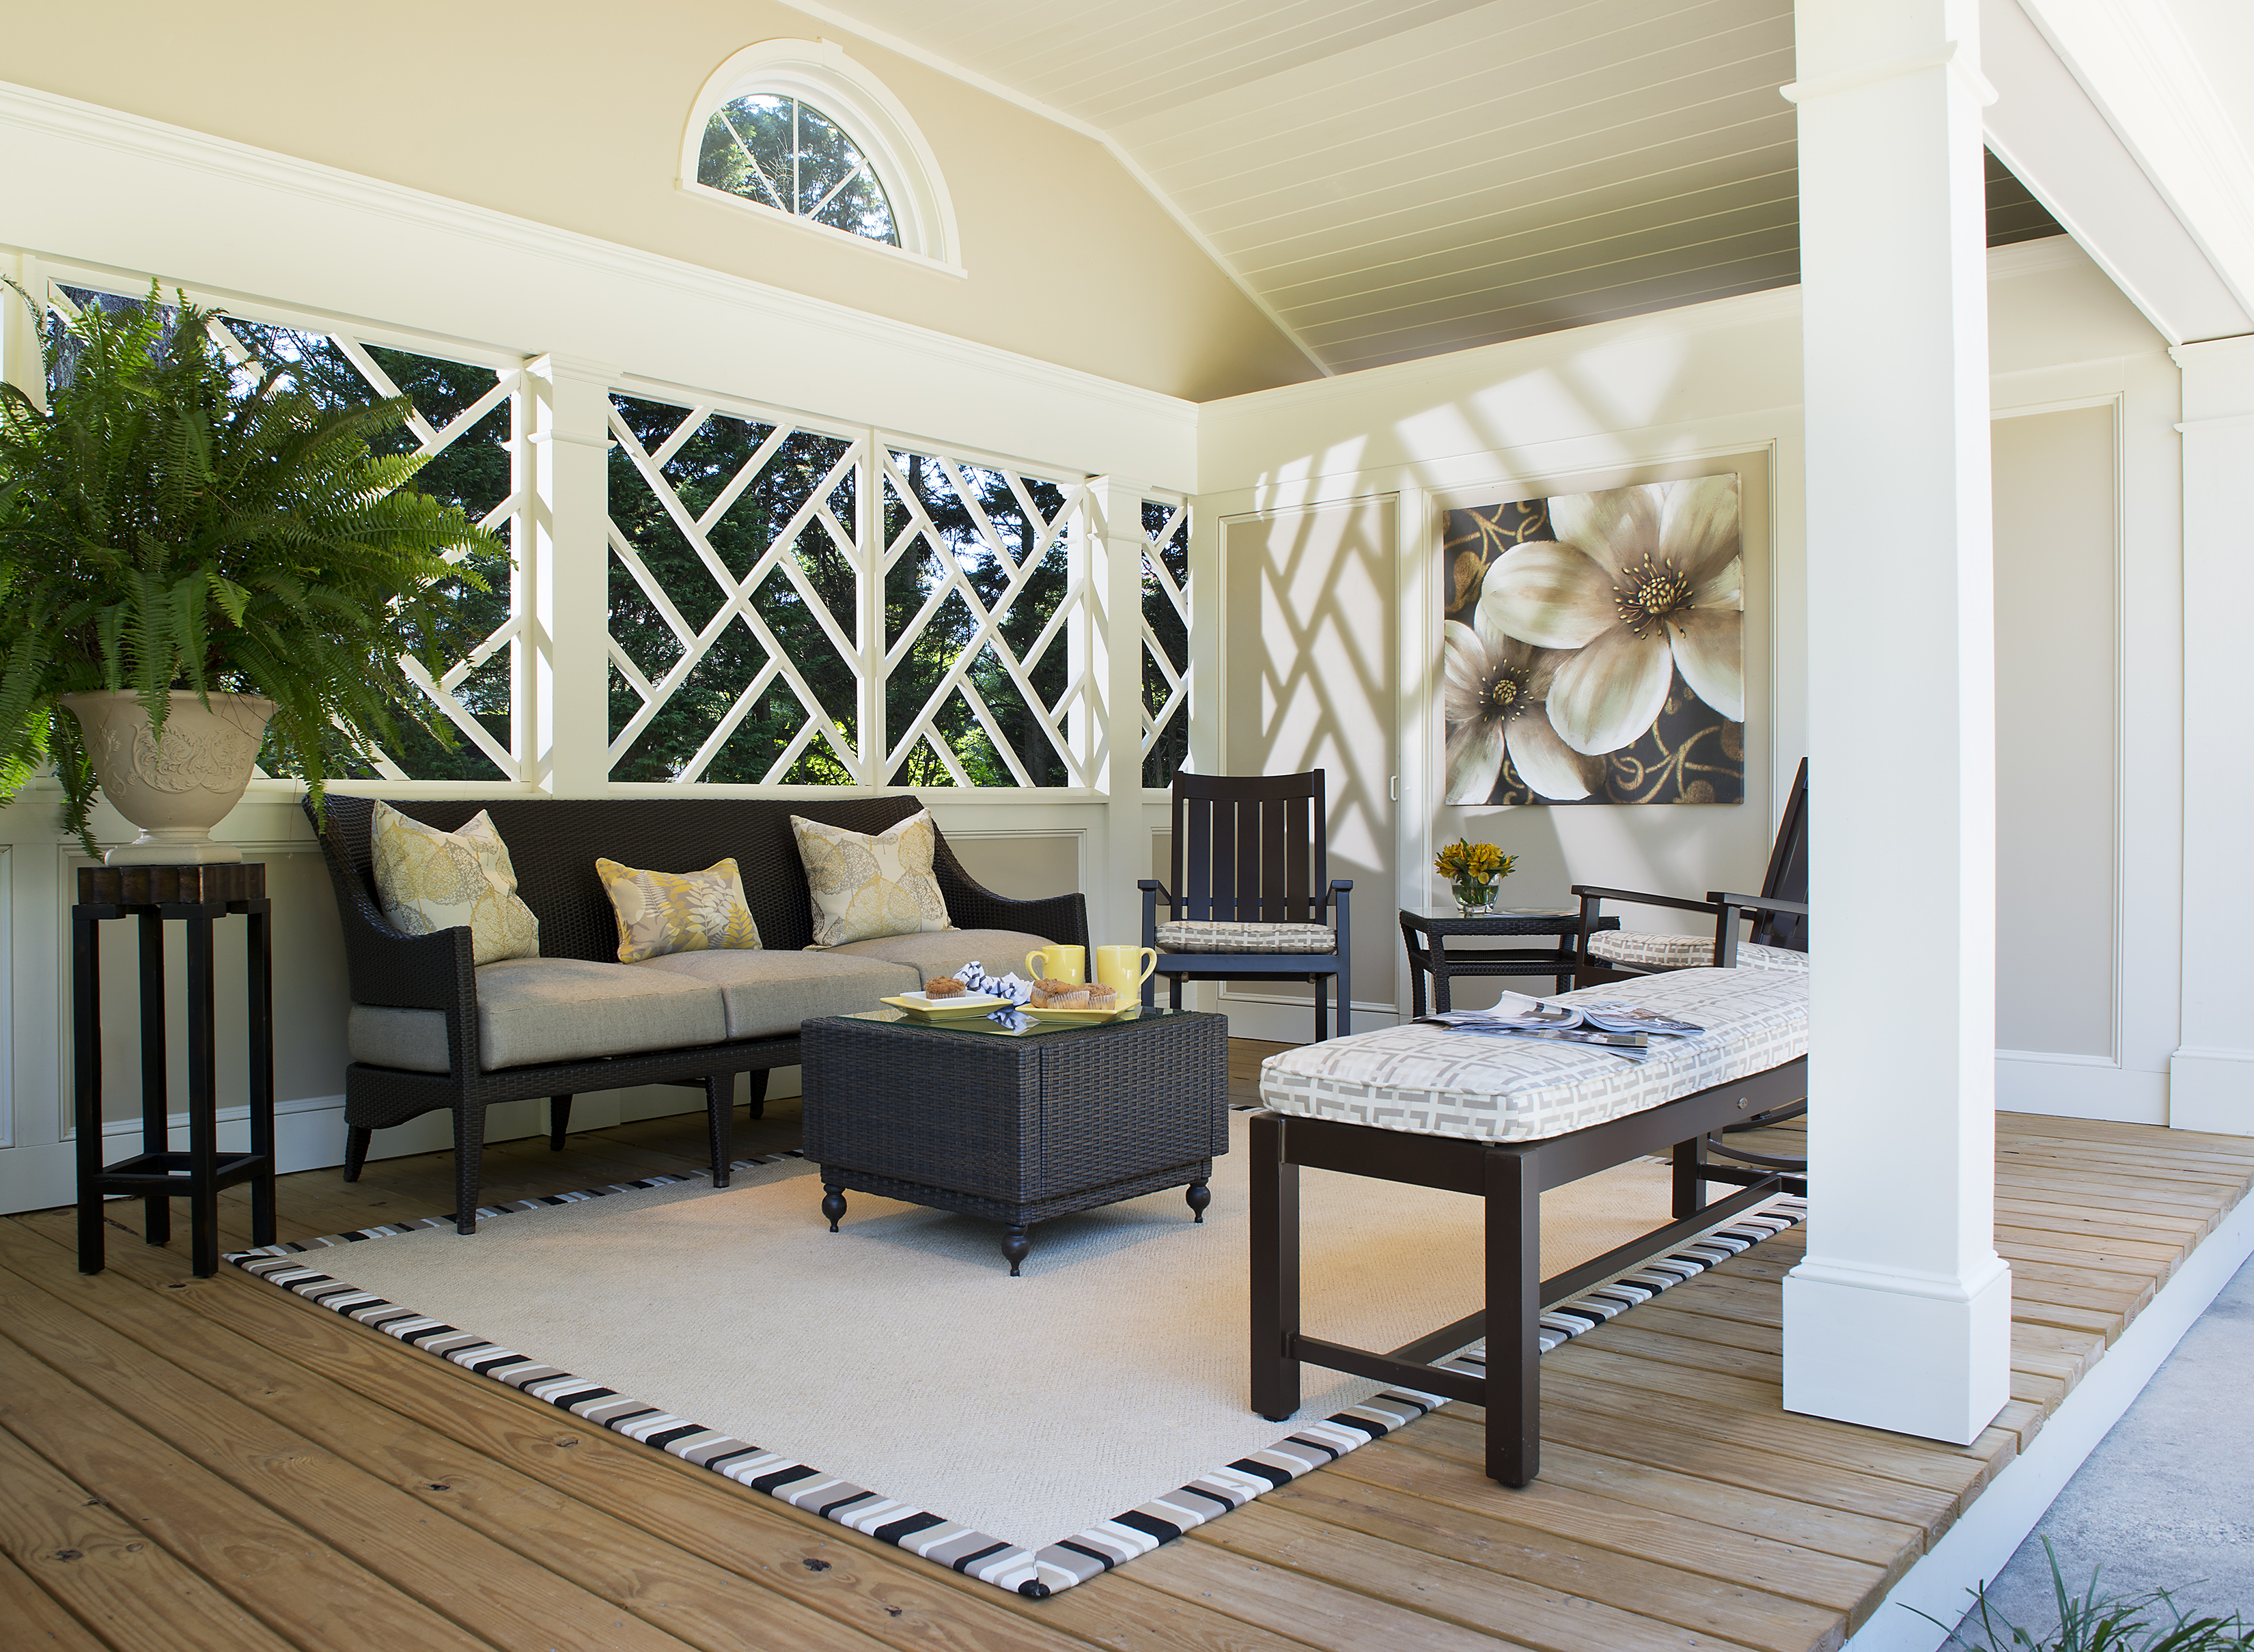 Preparing your patio for outdoor gatherings